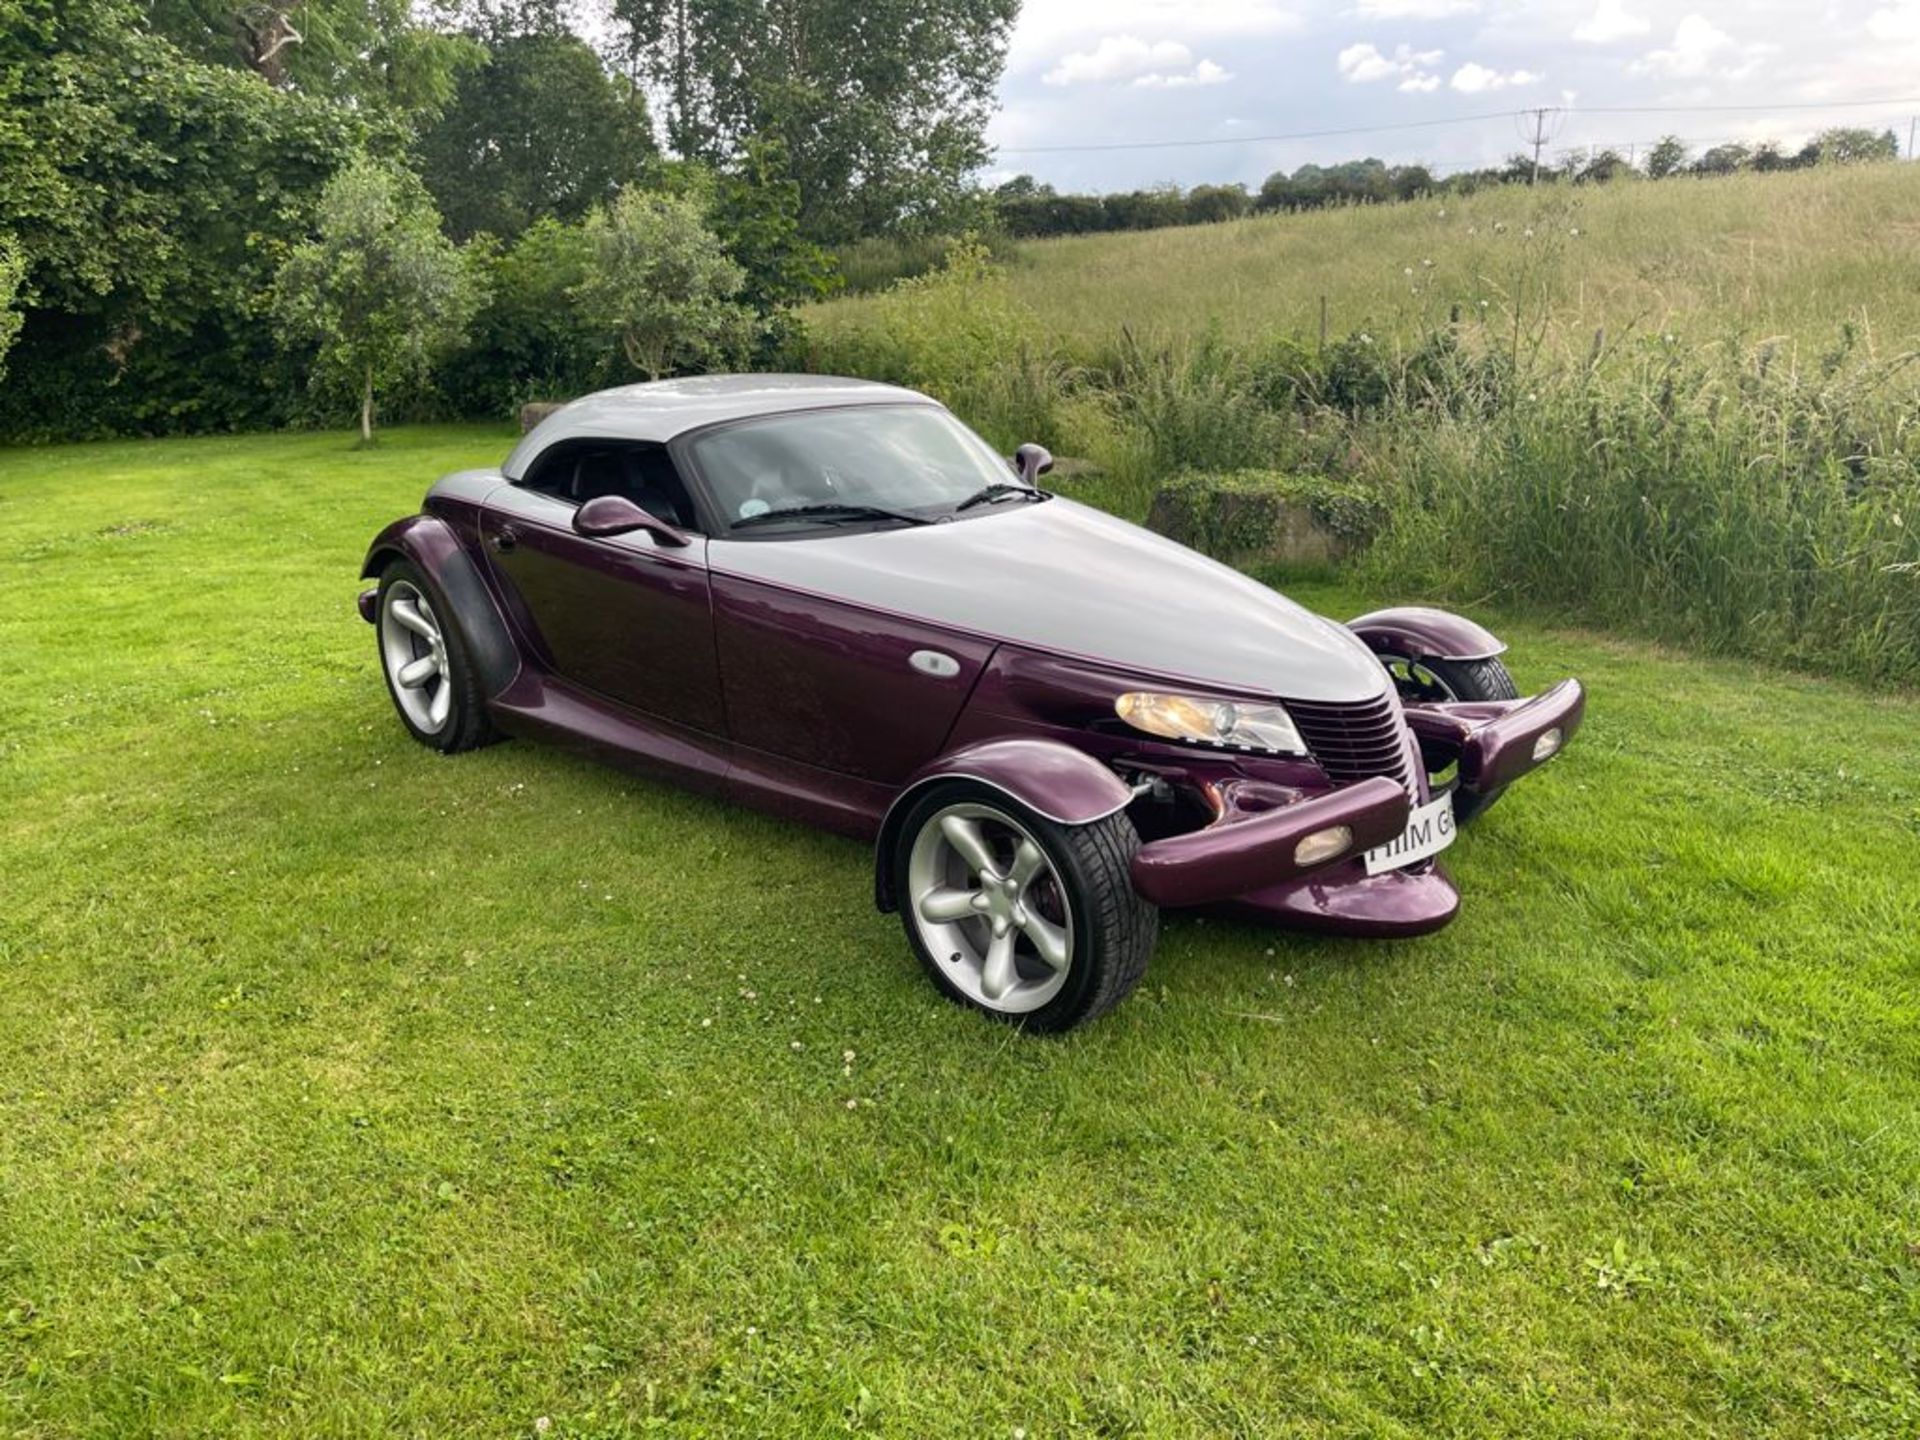 1998 CHRYSLER PLYMOUTH PROWLER V6 2 DOOR CONVERTIBLE, 3500cc PETROL ENGINE, AUTO *NO VAT* - Image 7 of 32